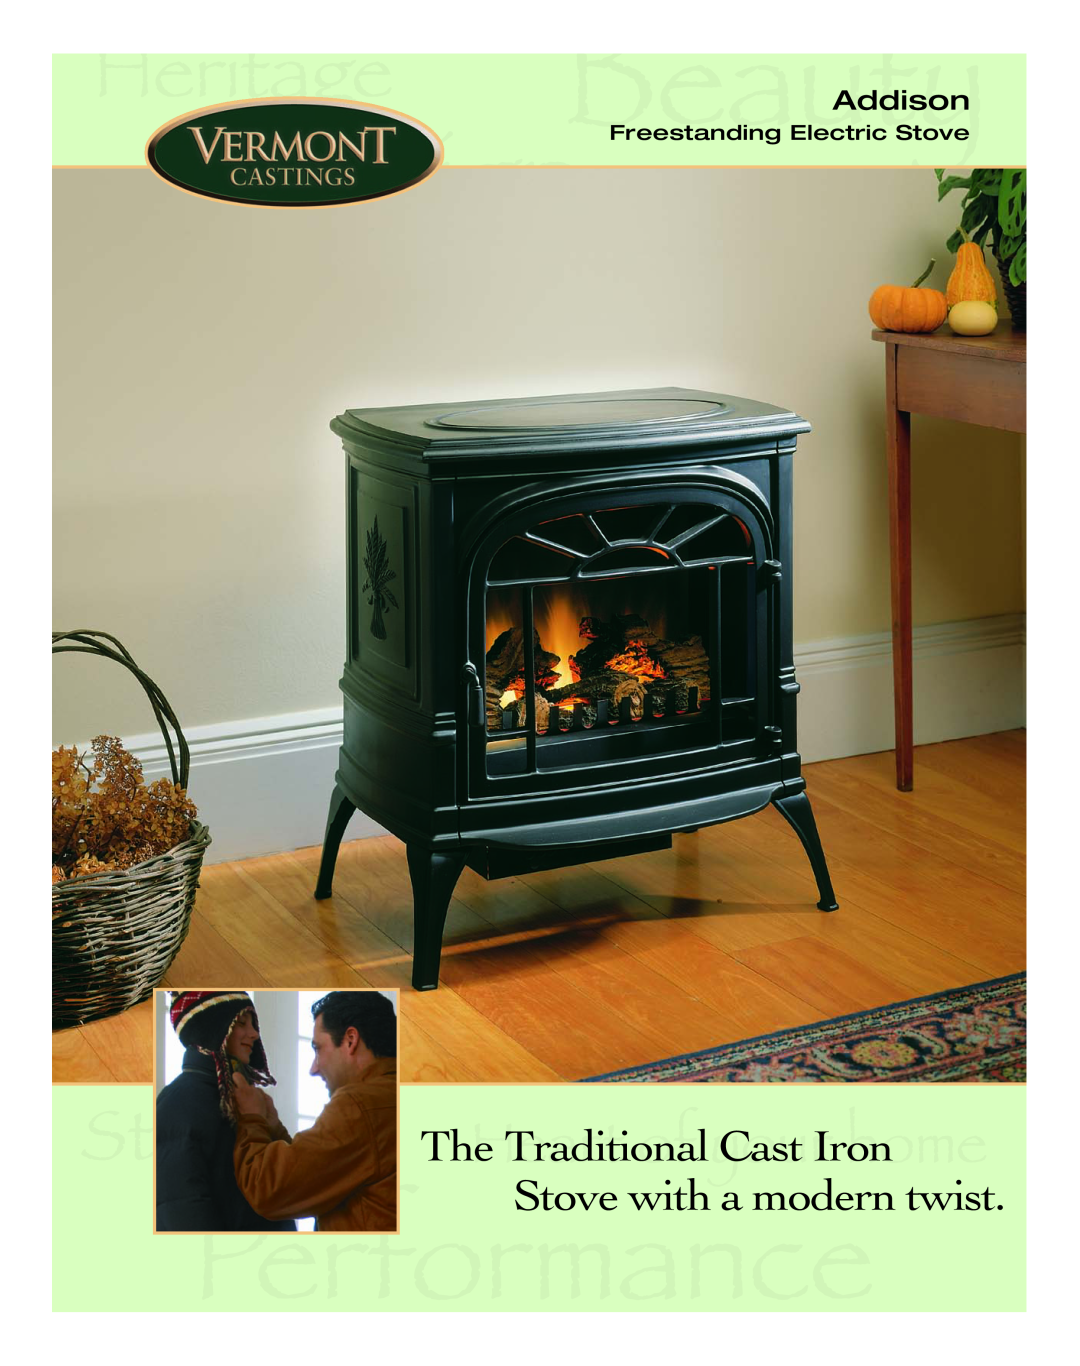 Vermont Casting 2905 manual The Traditional Cast Iron Stove with a modern twist, Addison, Freestanding Electric Stove 